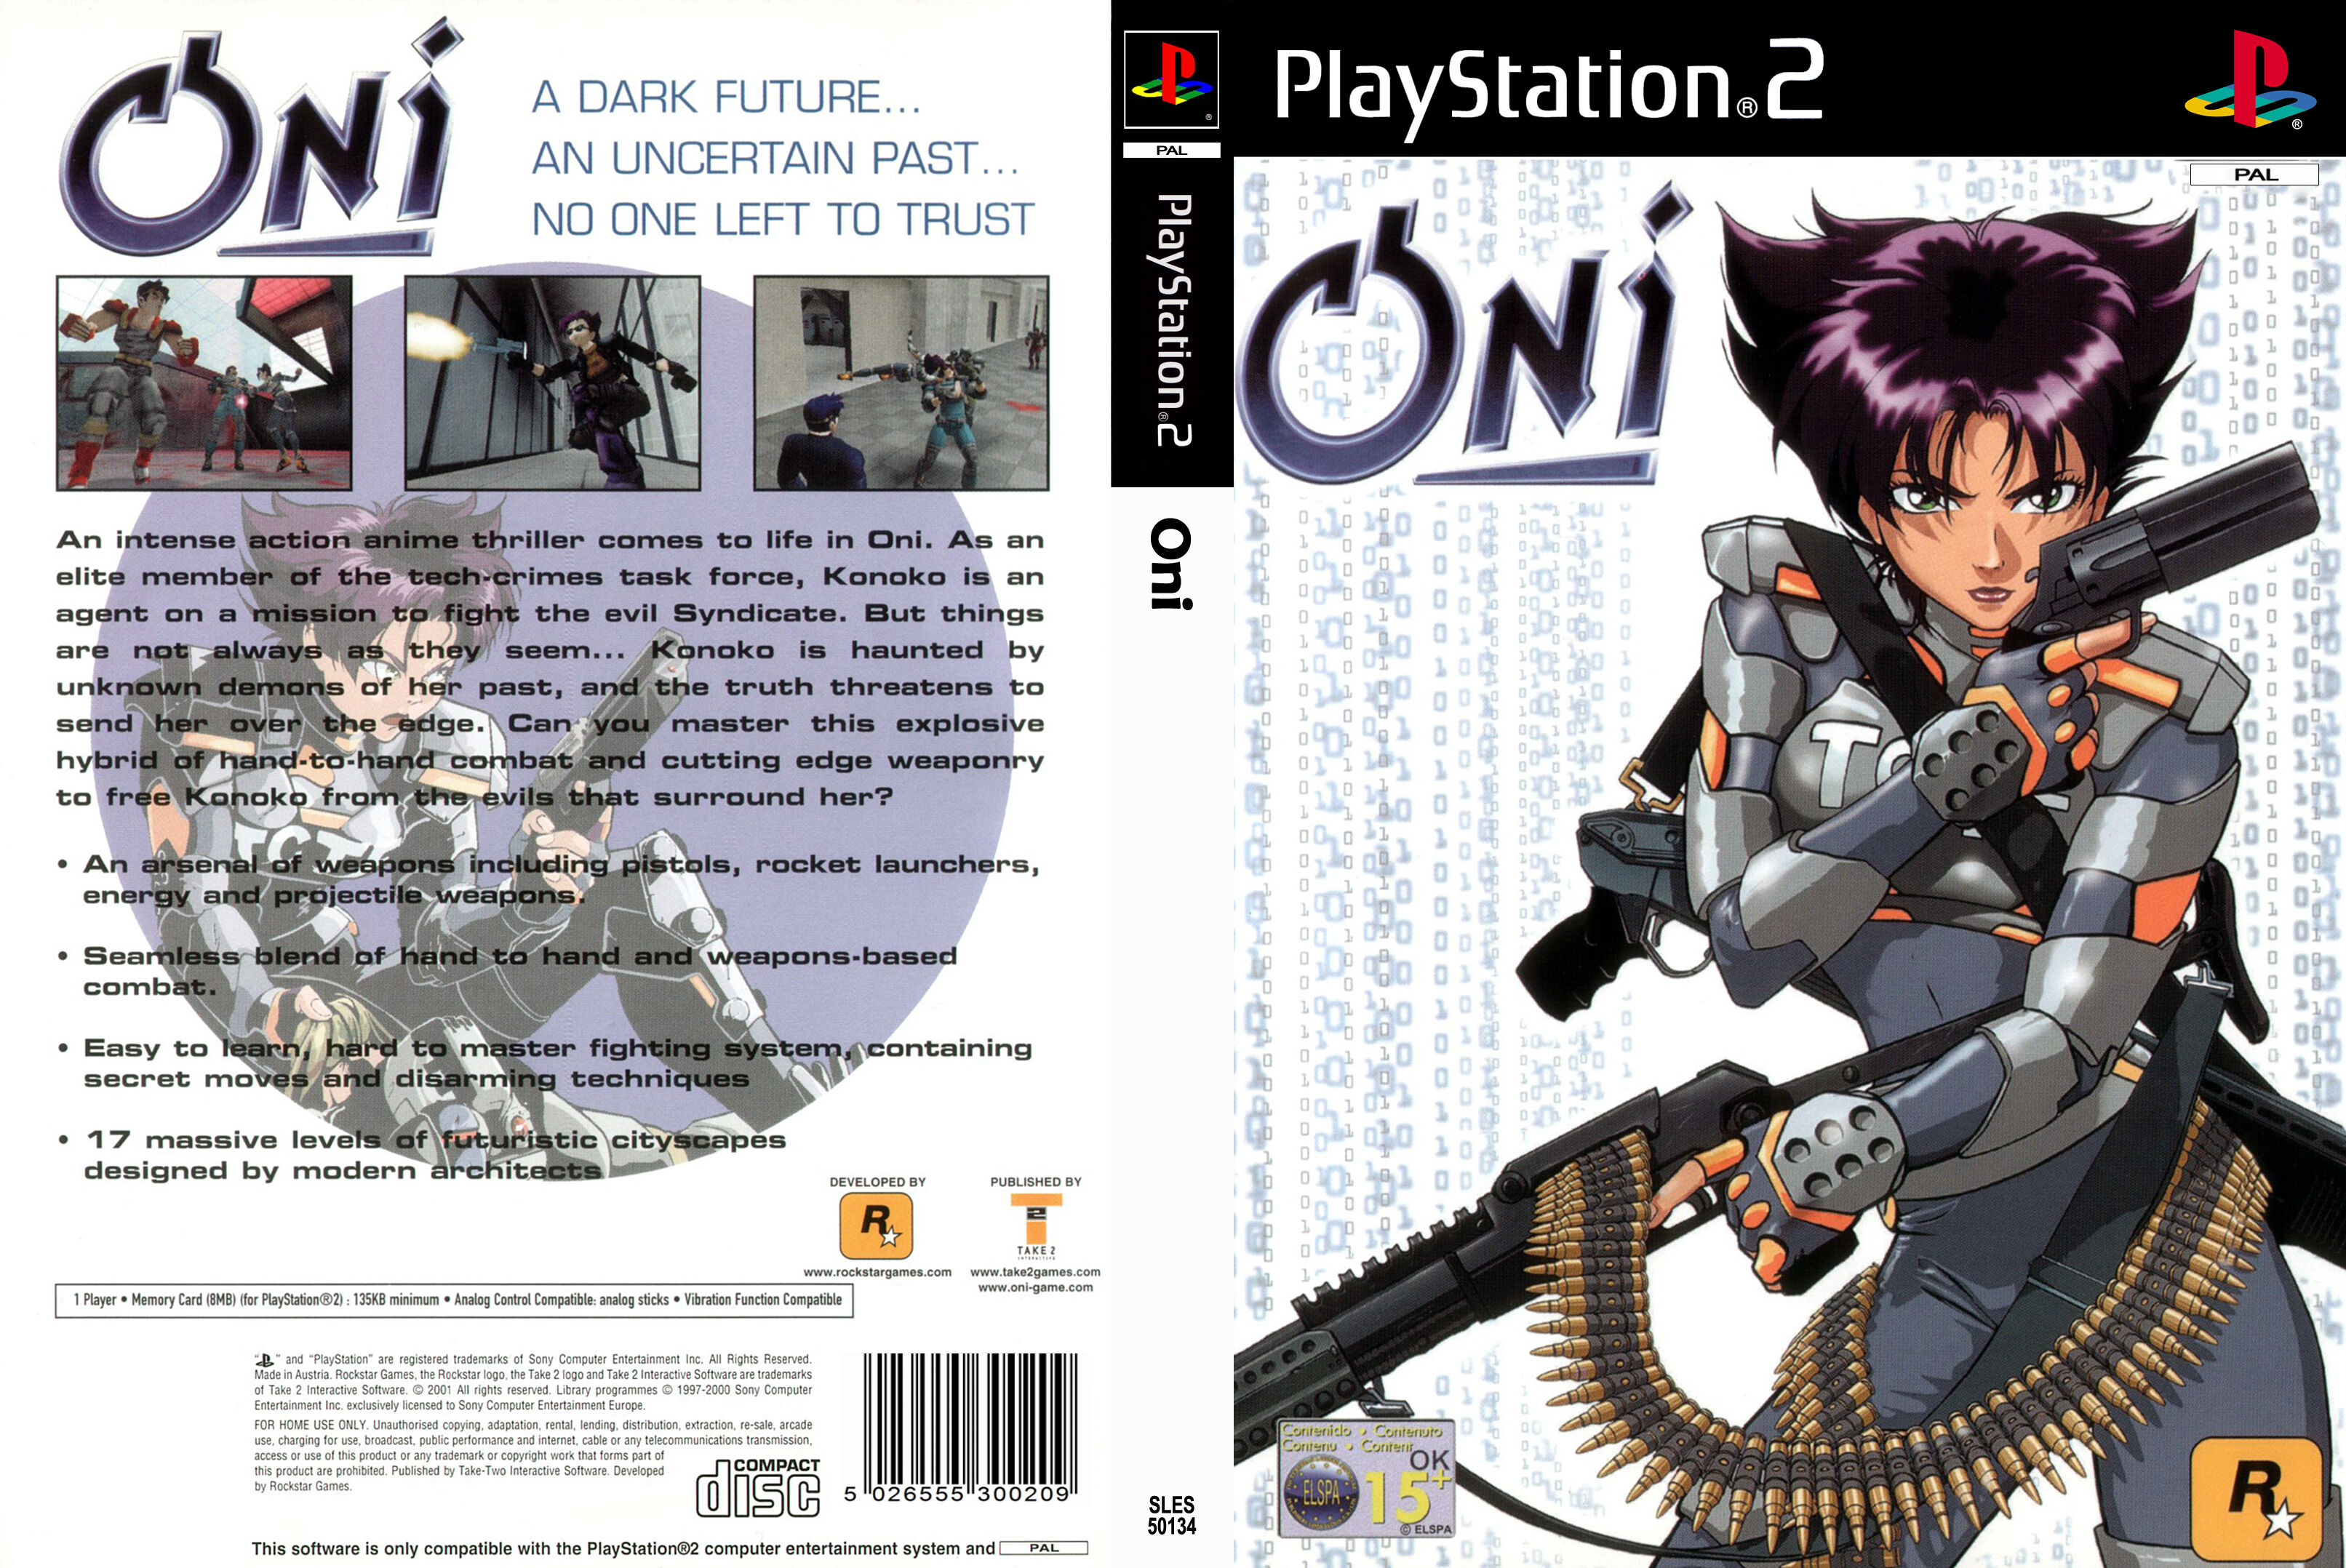 Oni 2 : Angel Studios Lost Sequel to Bungie's Cult Classic (Video